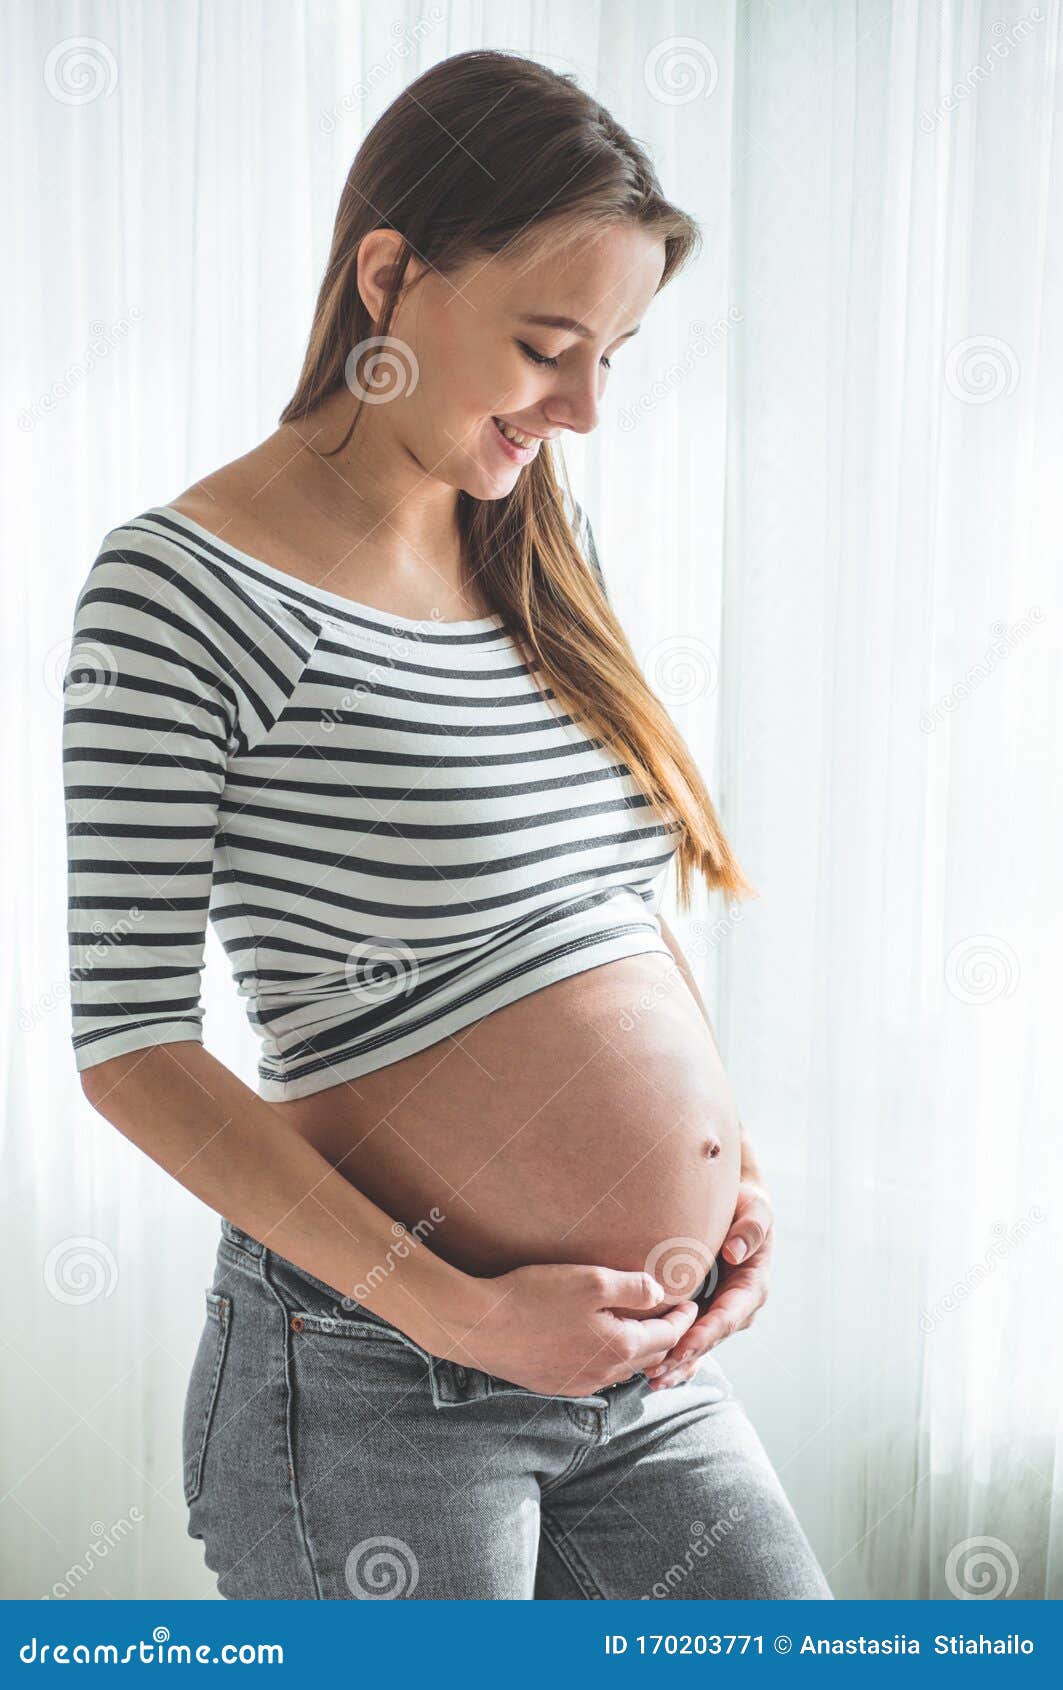 Happy Pregnant Woman with Big Belly by the Window. Concepts of